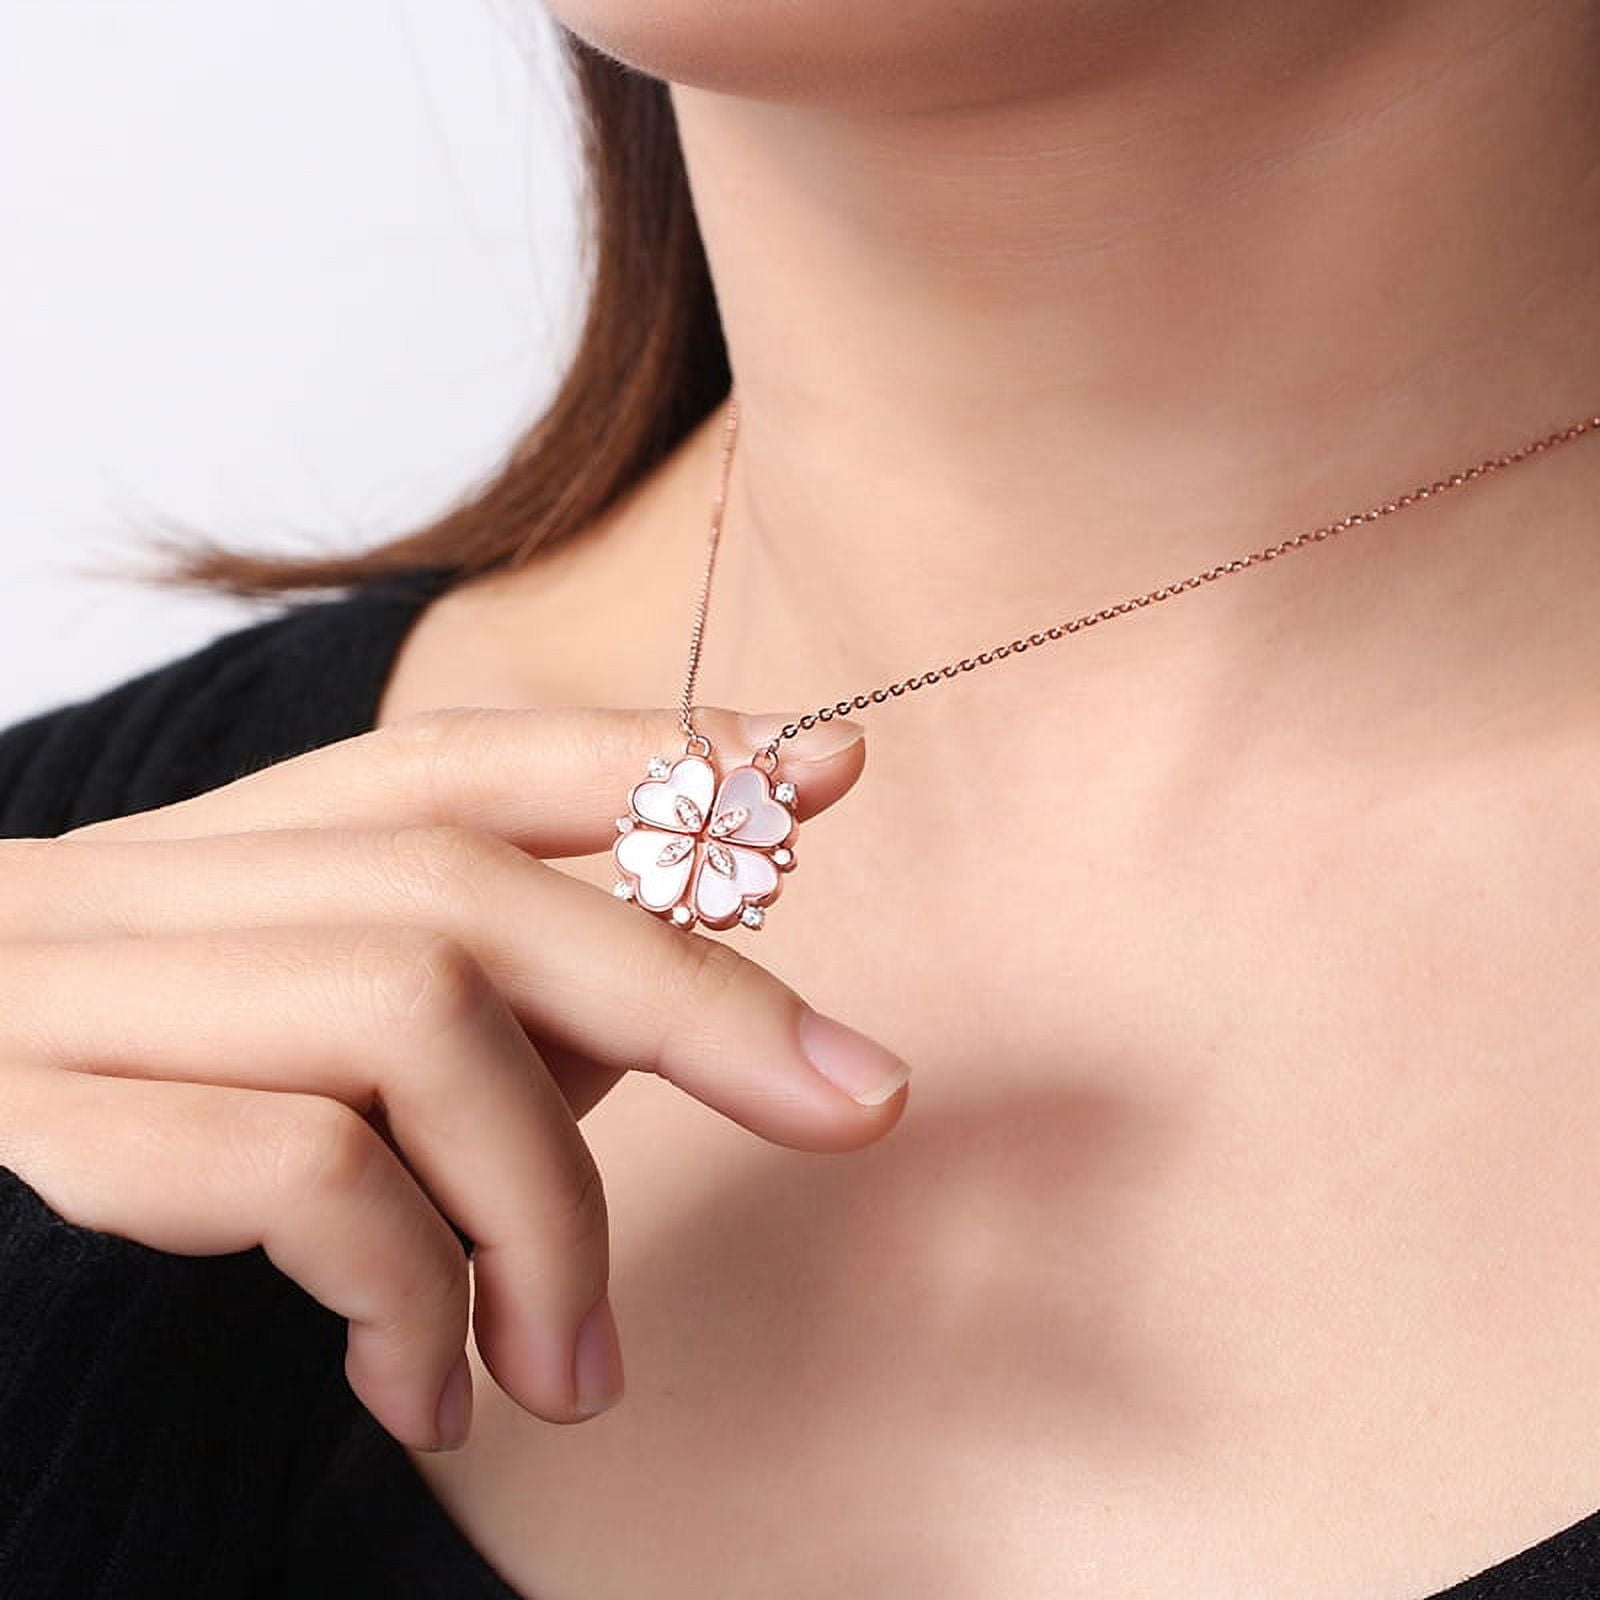 Four-Leaf Clover Transform to Four Hearts Magnetic Pendant Necklace